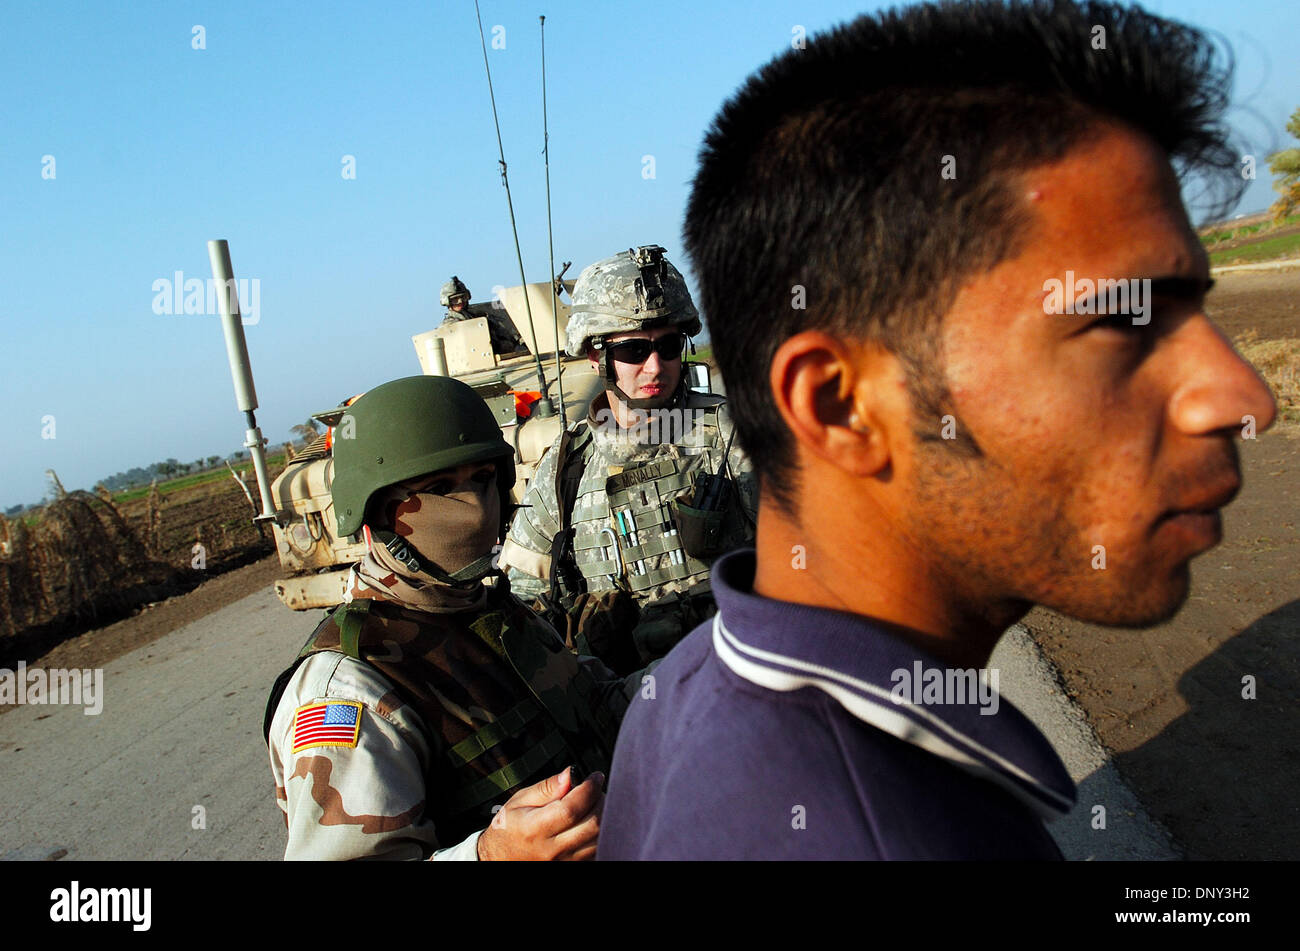 Jan 14, 2006; Abu Ghraib, Baghdad, IRAQ; An American Army interpreter asks an Iraqi man about his job with 1st Lt. KURT MCNALLY during a traffic stop on a country road north of Abu Ghraib, Iraq, Jan. 14, 2006. The man said he was a taxi driver in Baghdad. McNally is a platoon leader in Co. A, 2nd of the 22nd Infantry, 10th Mountain Division. Mandatory Credit: Photo by Bill Putnam/Z Stock Photo